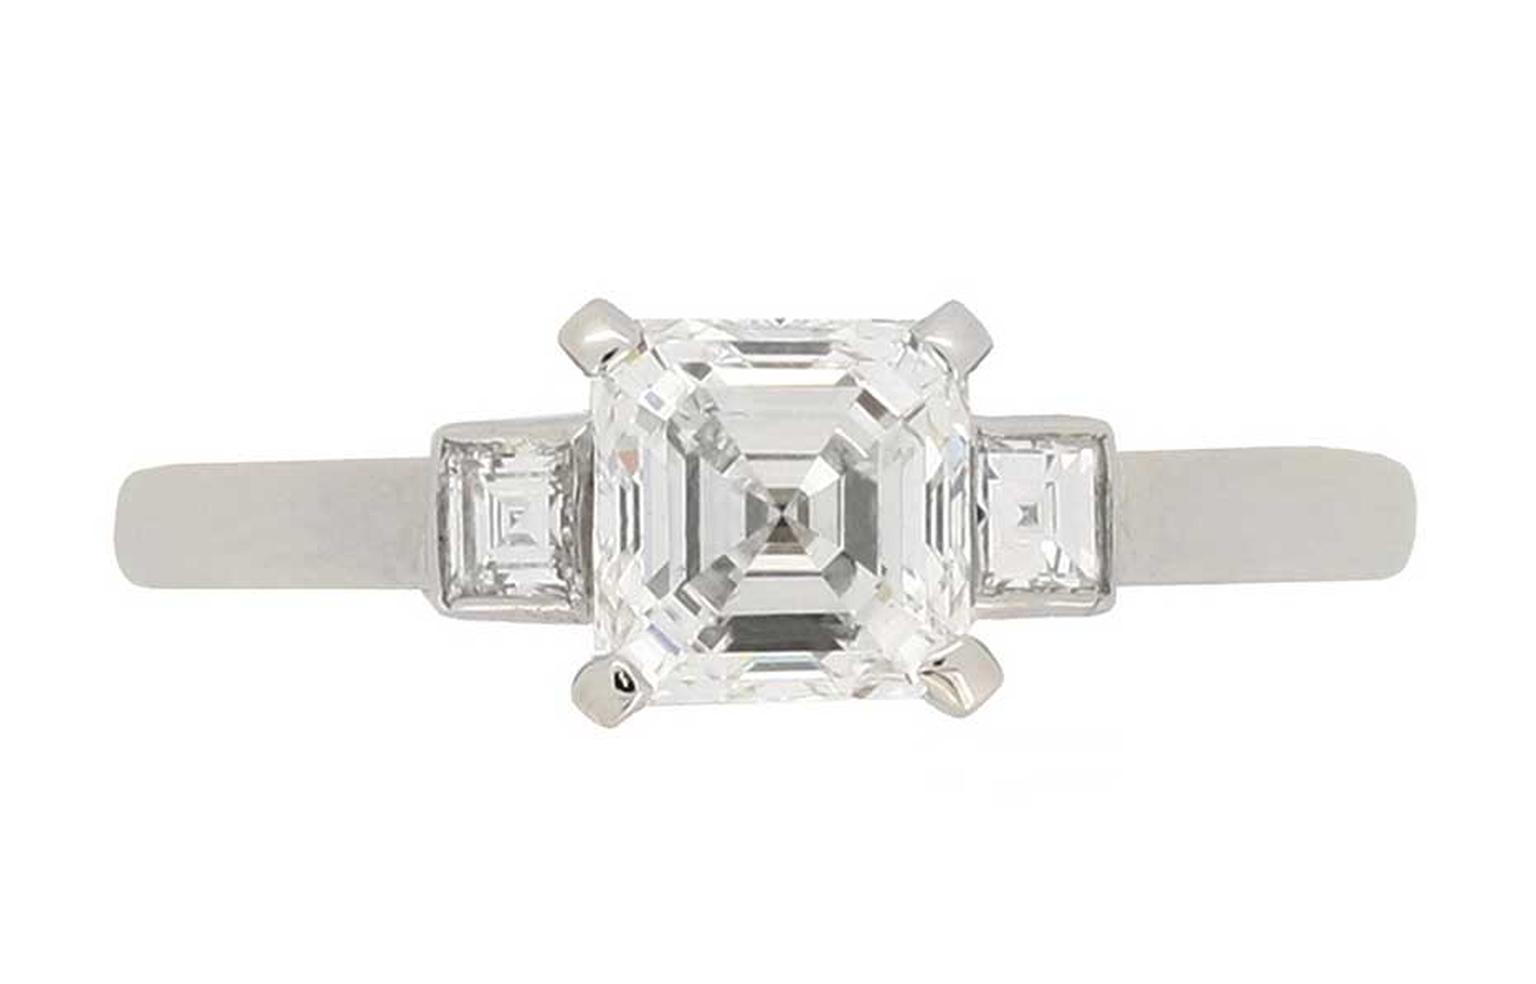 Vintage diamond engagement ring from the Art Deco era, circa 1935, set with a 0.90ct square emerald-cut diamond, available from Berganza in Hatton Garden, London (£9,900).